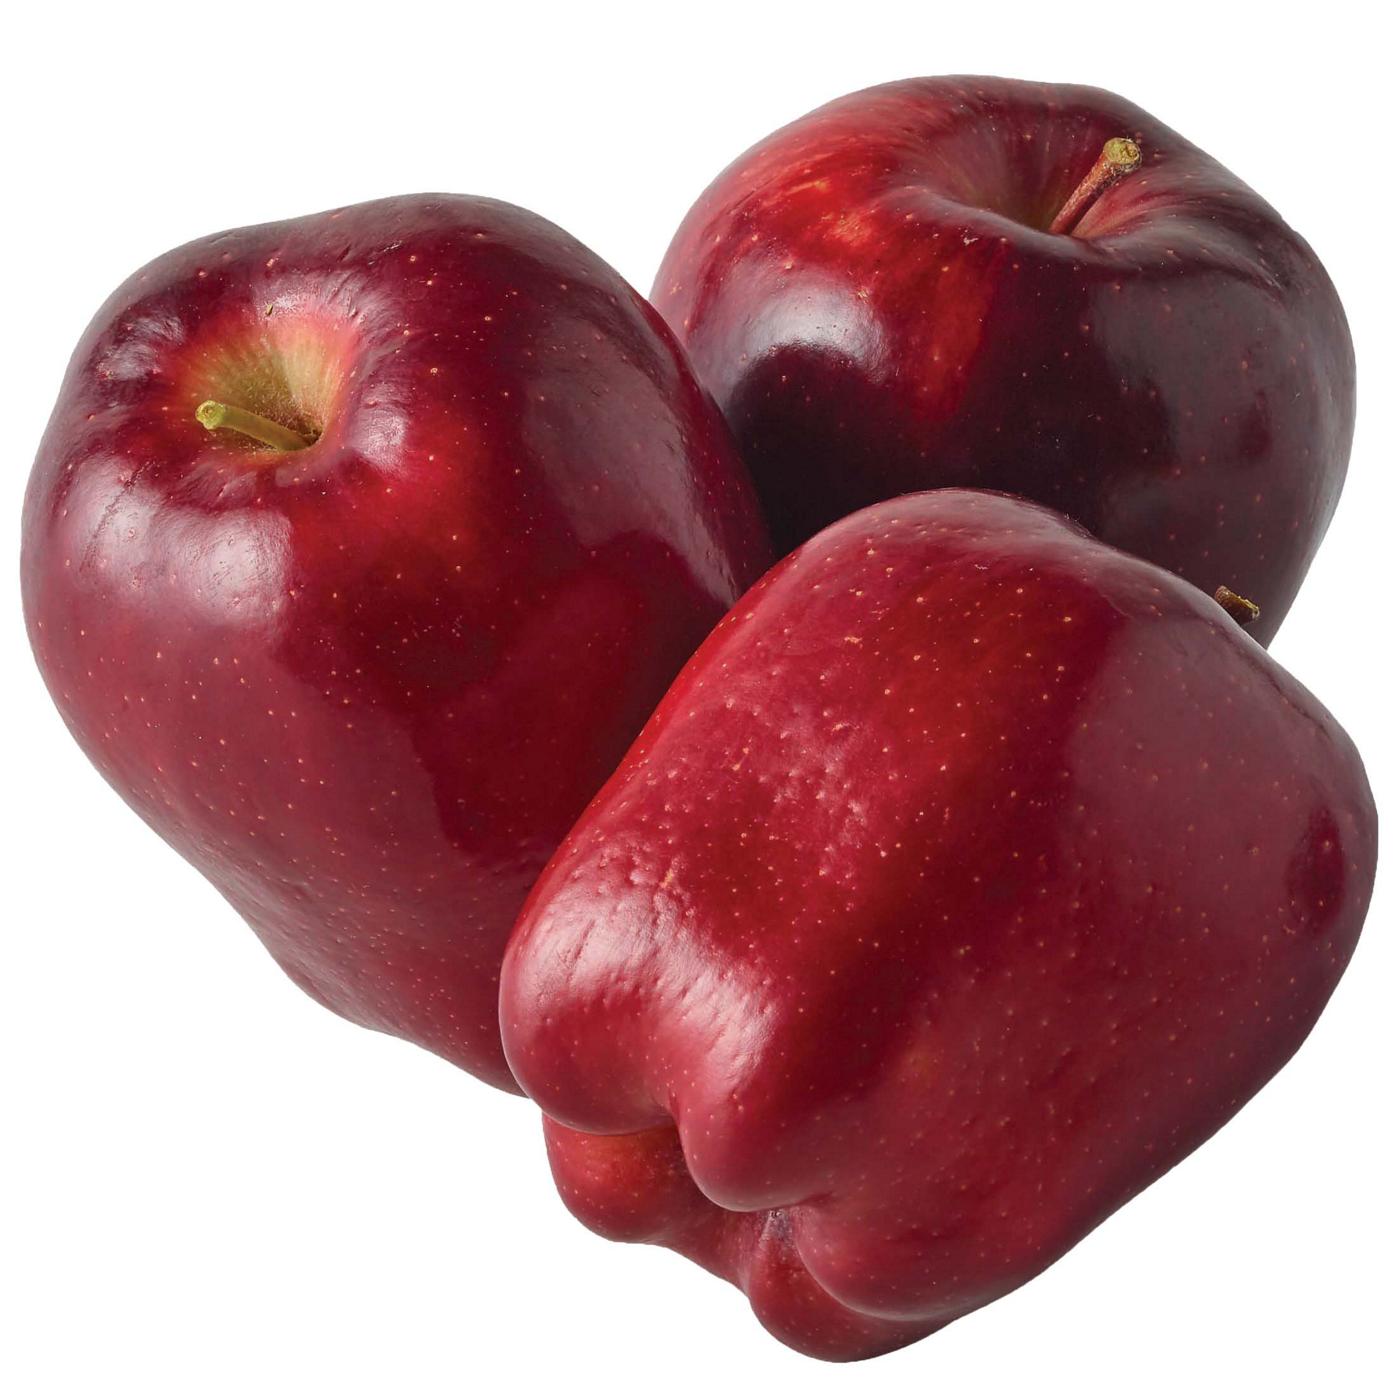 Fresh Red Delicious Apple; image 1 of 2